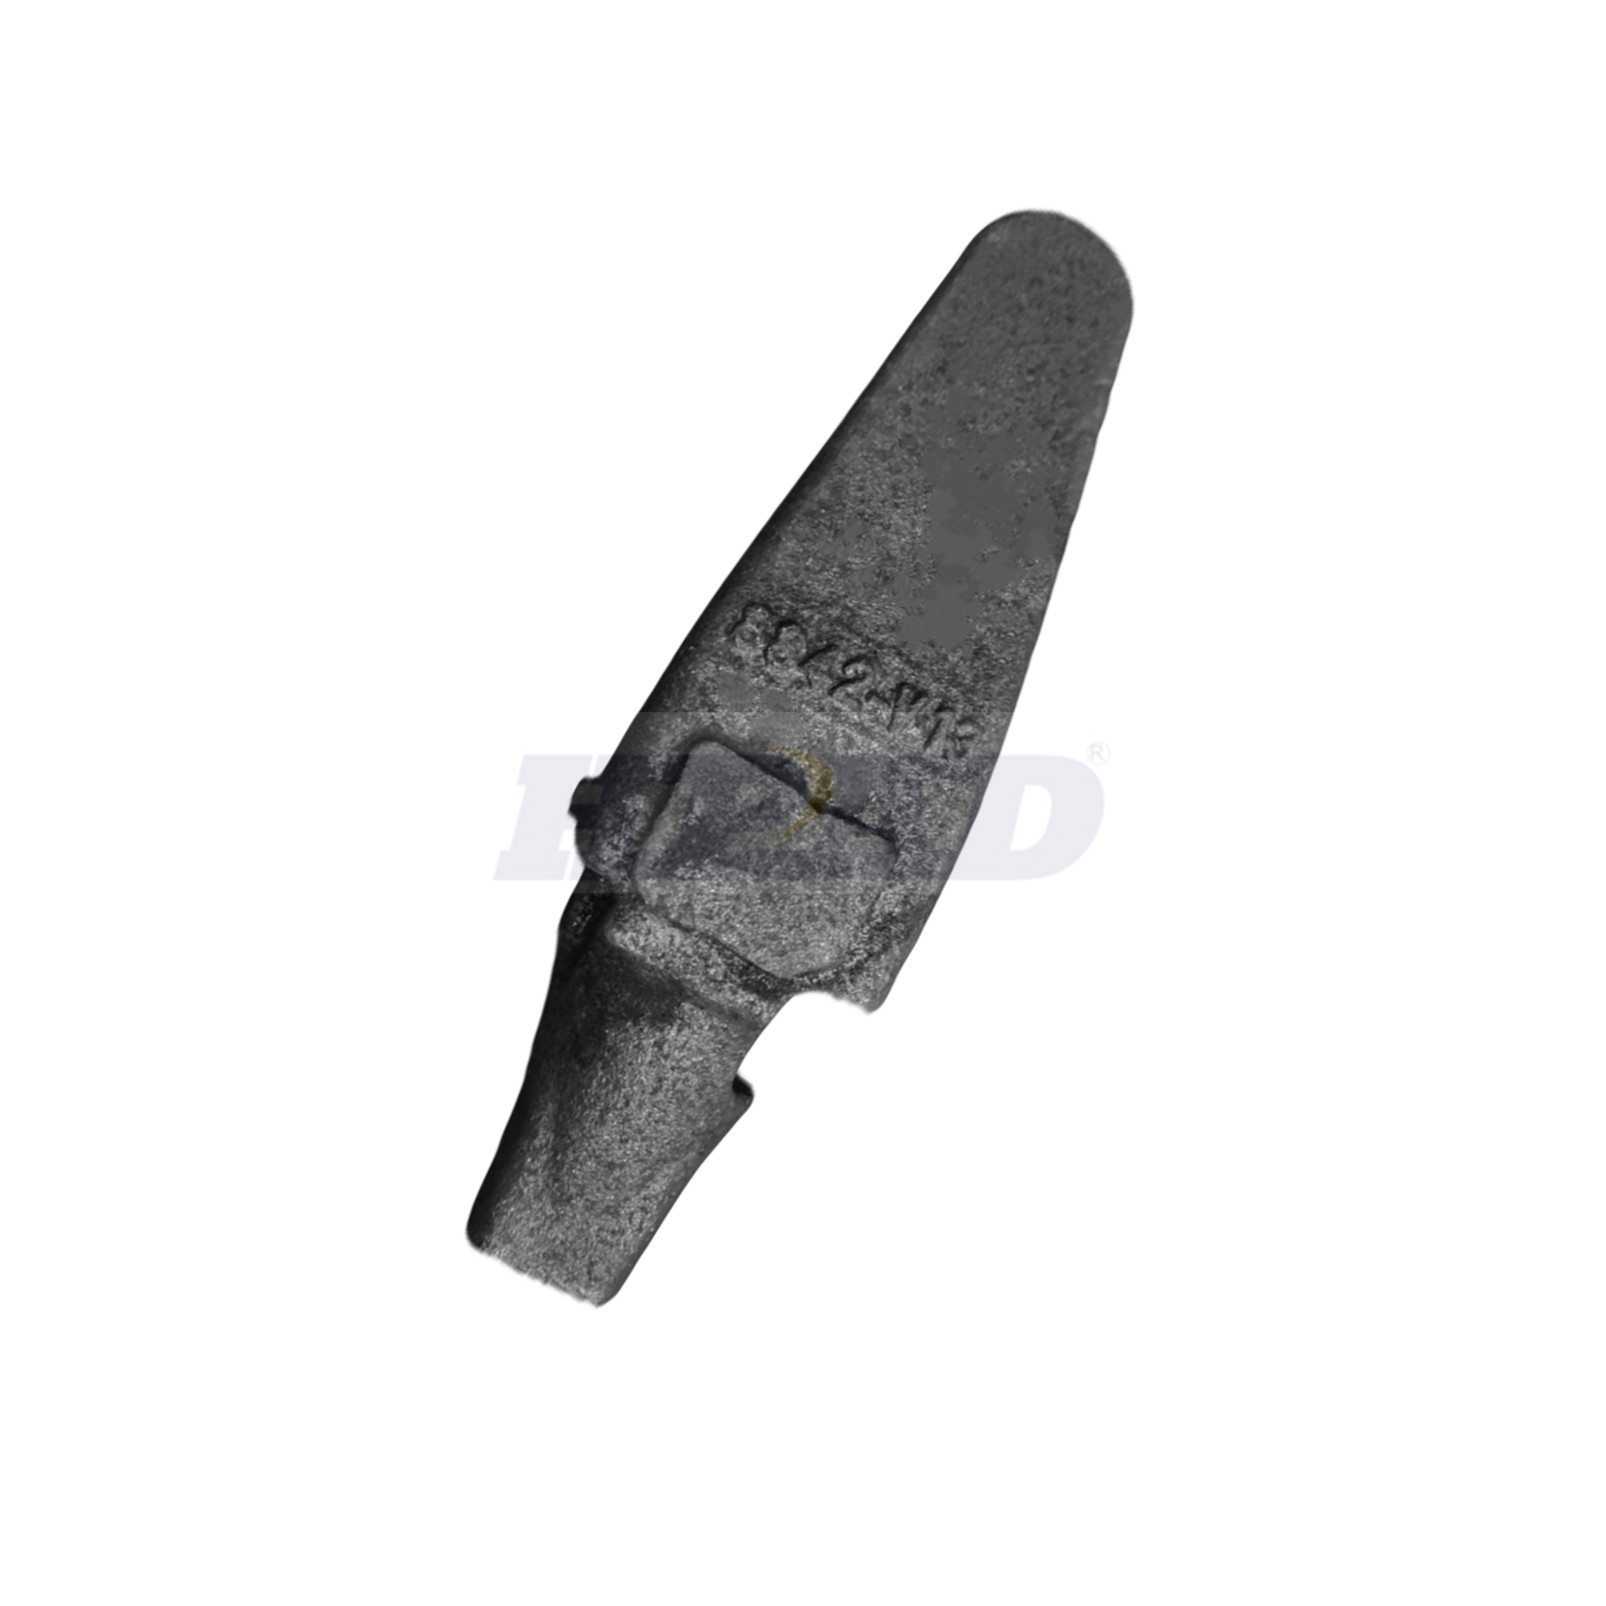 Excavator Spare Parts Casting Bucket Tooth 8842-V13